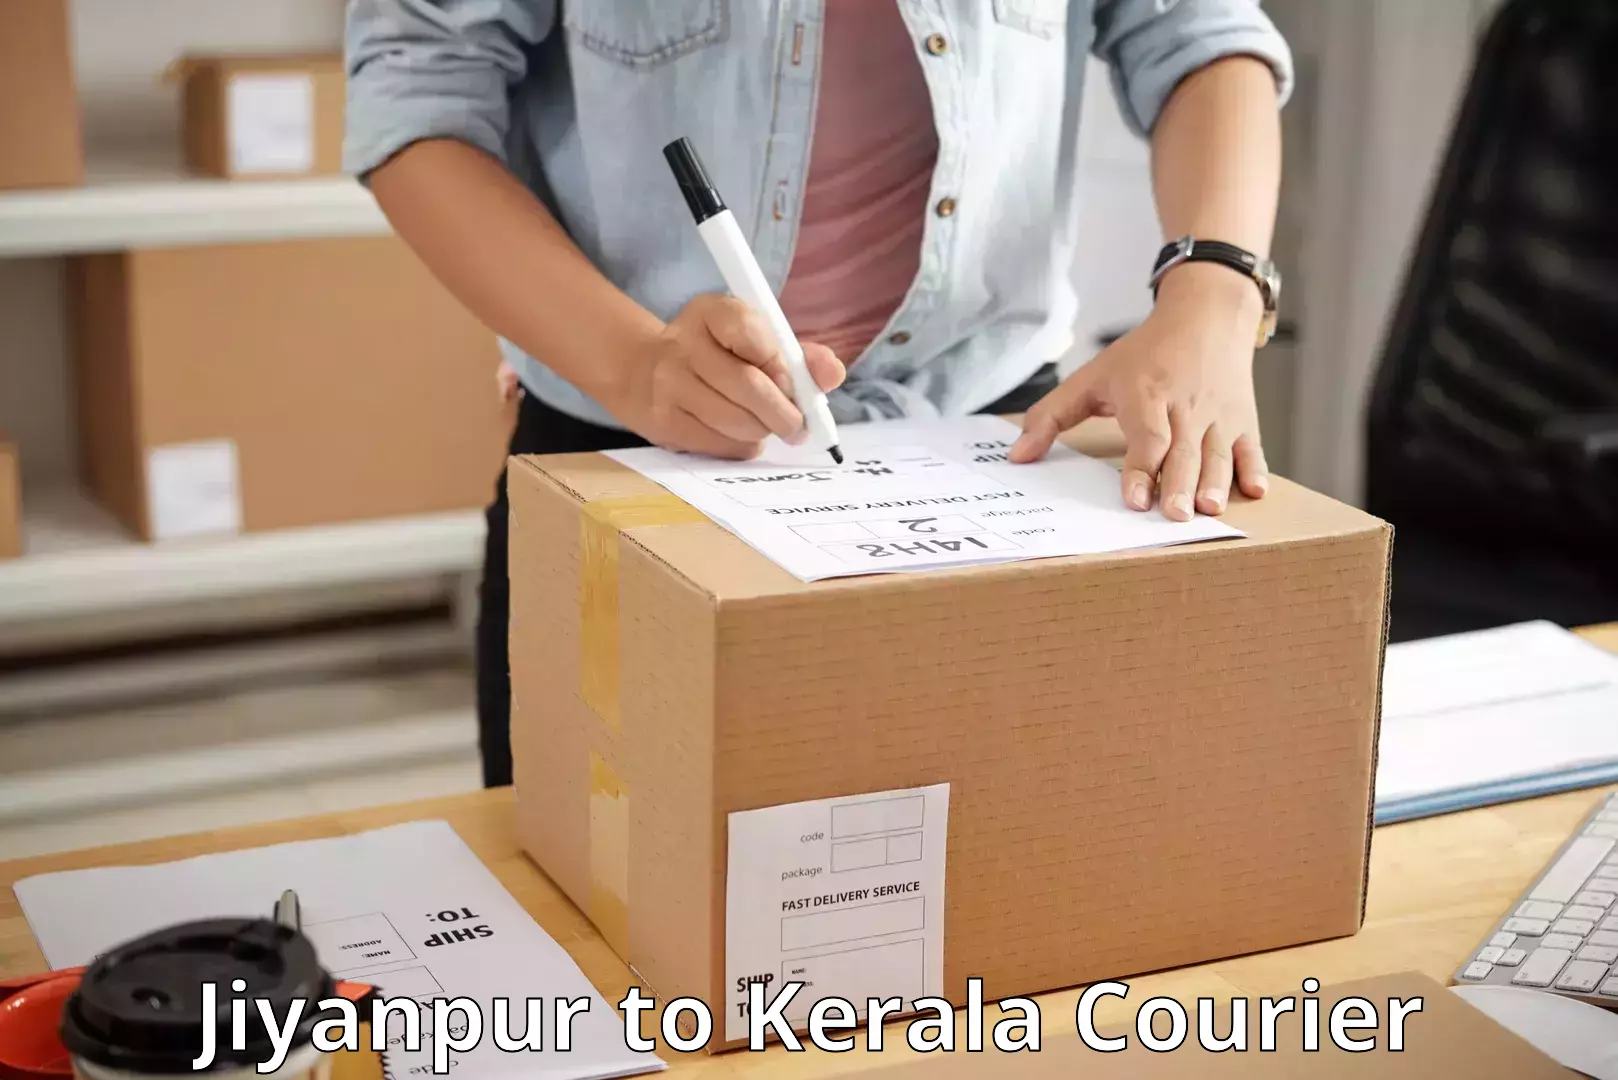 Efficient parcel service Jiyanpur to Kollam